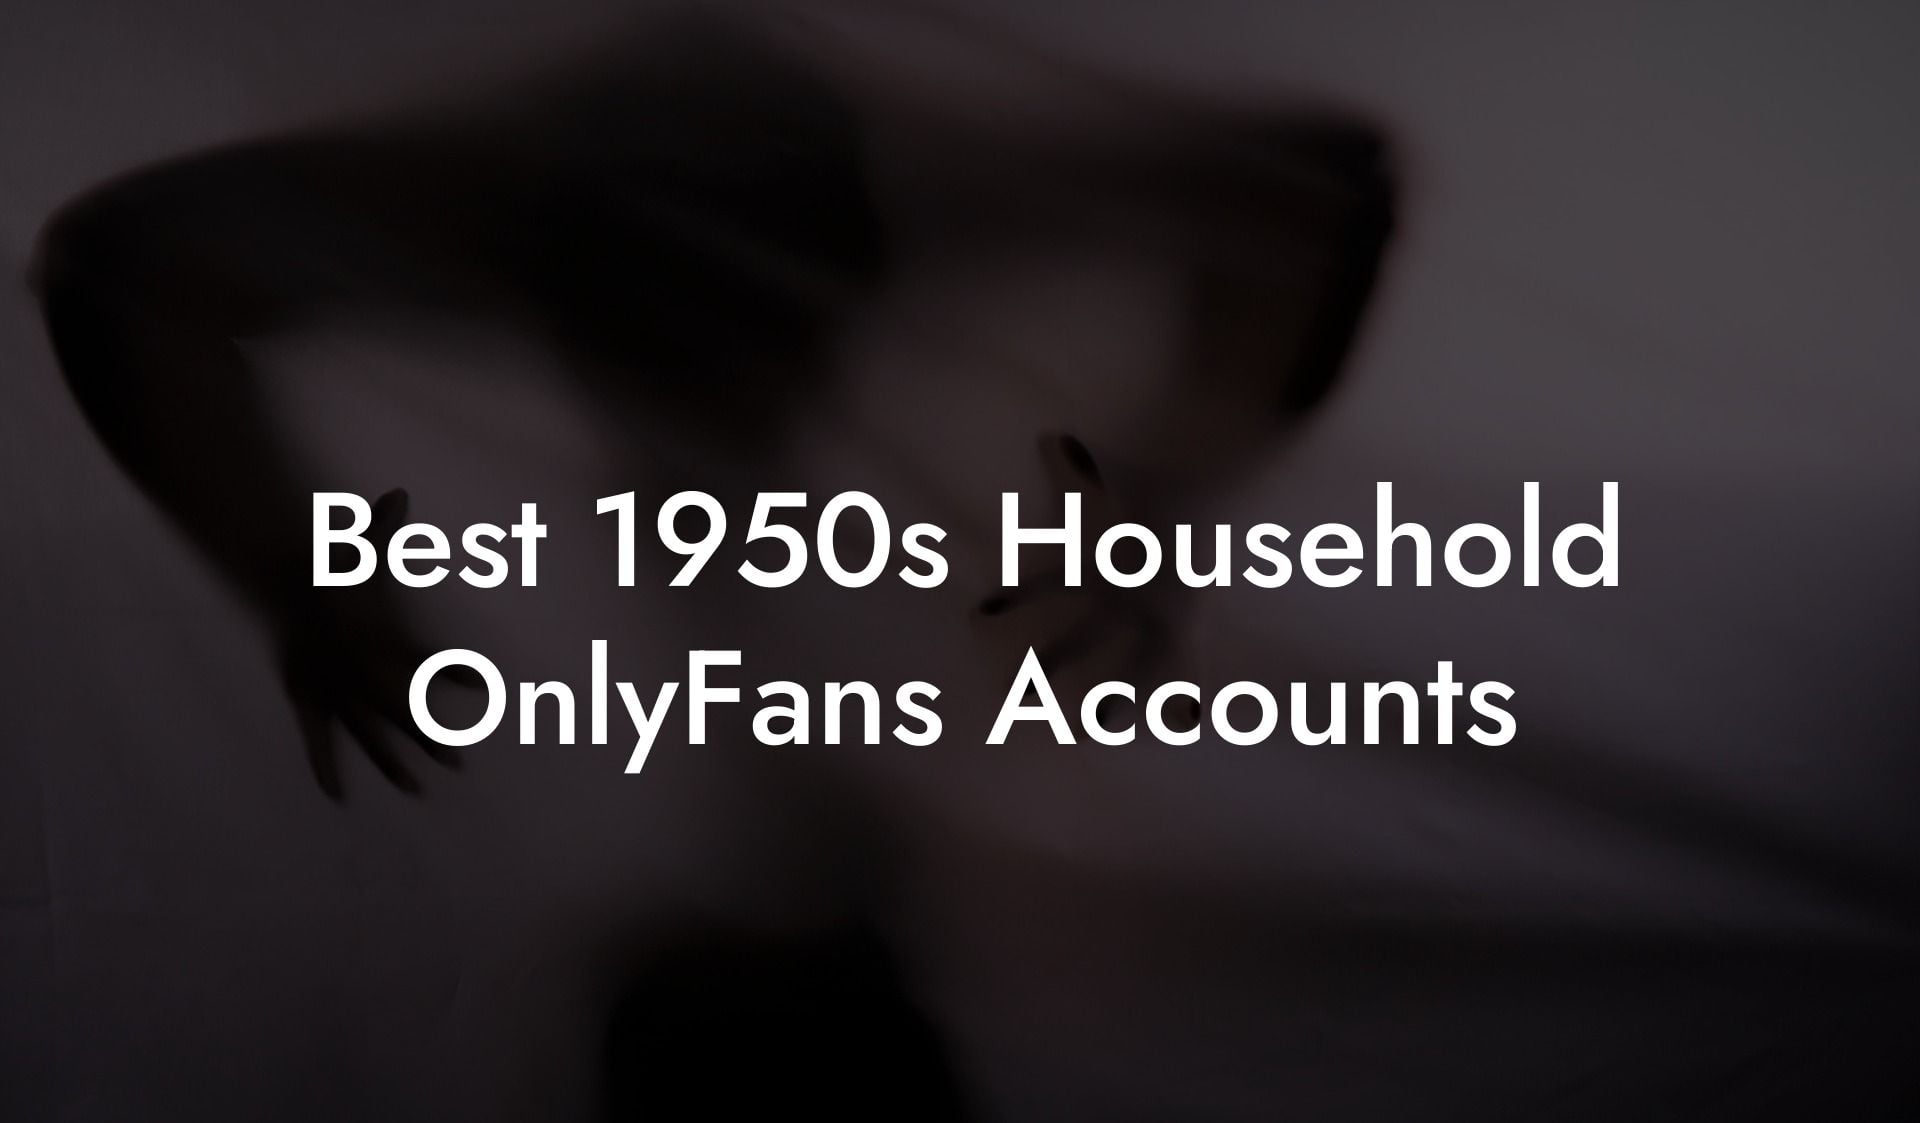 Best 1950s Household OnlyFans Accounts